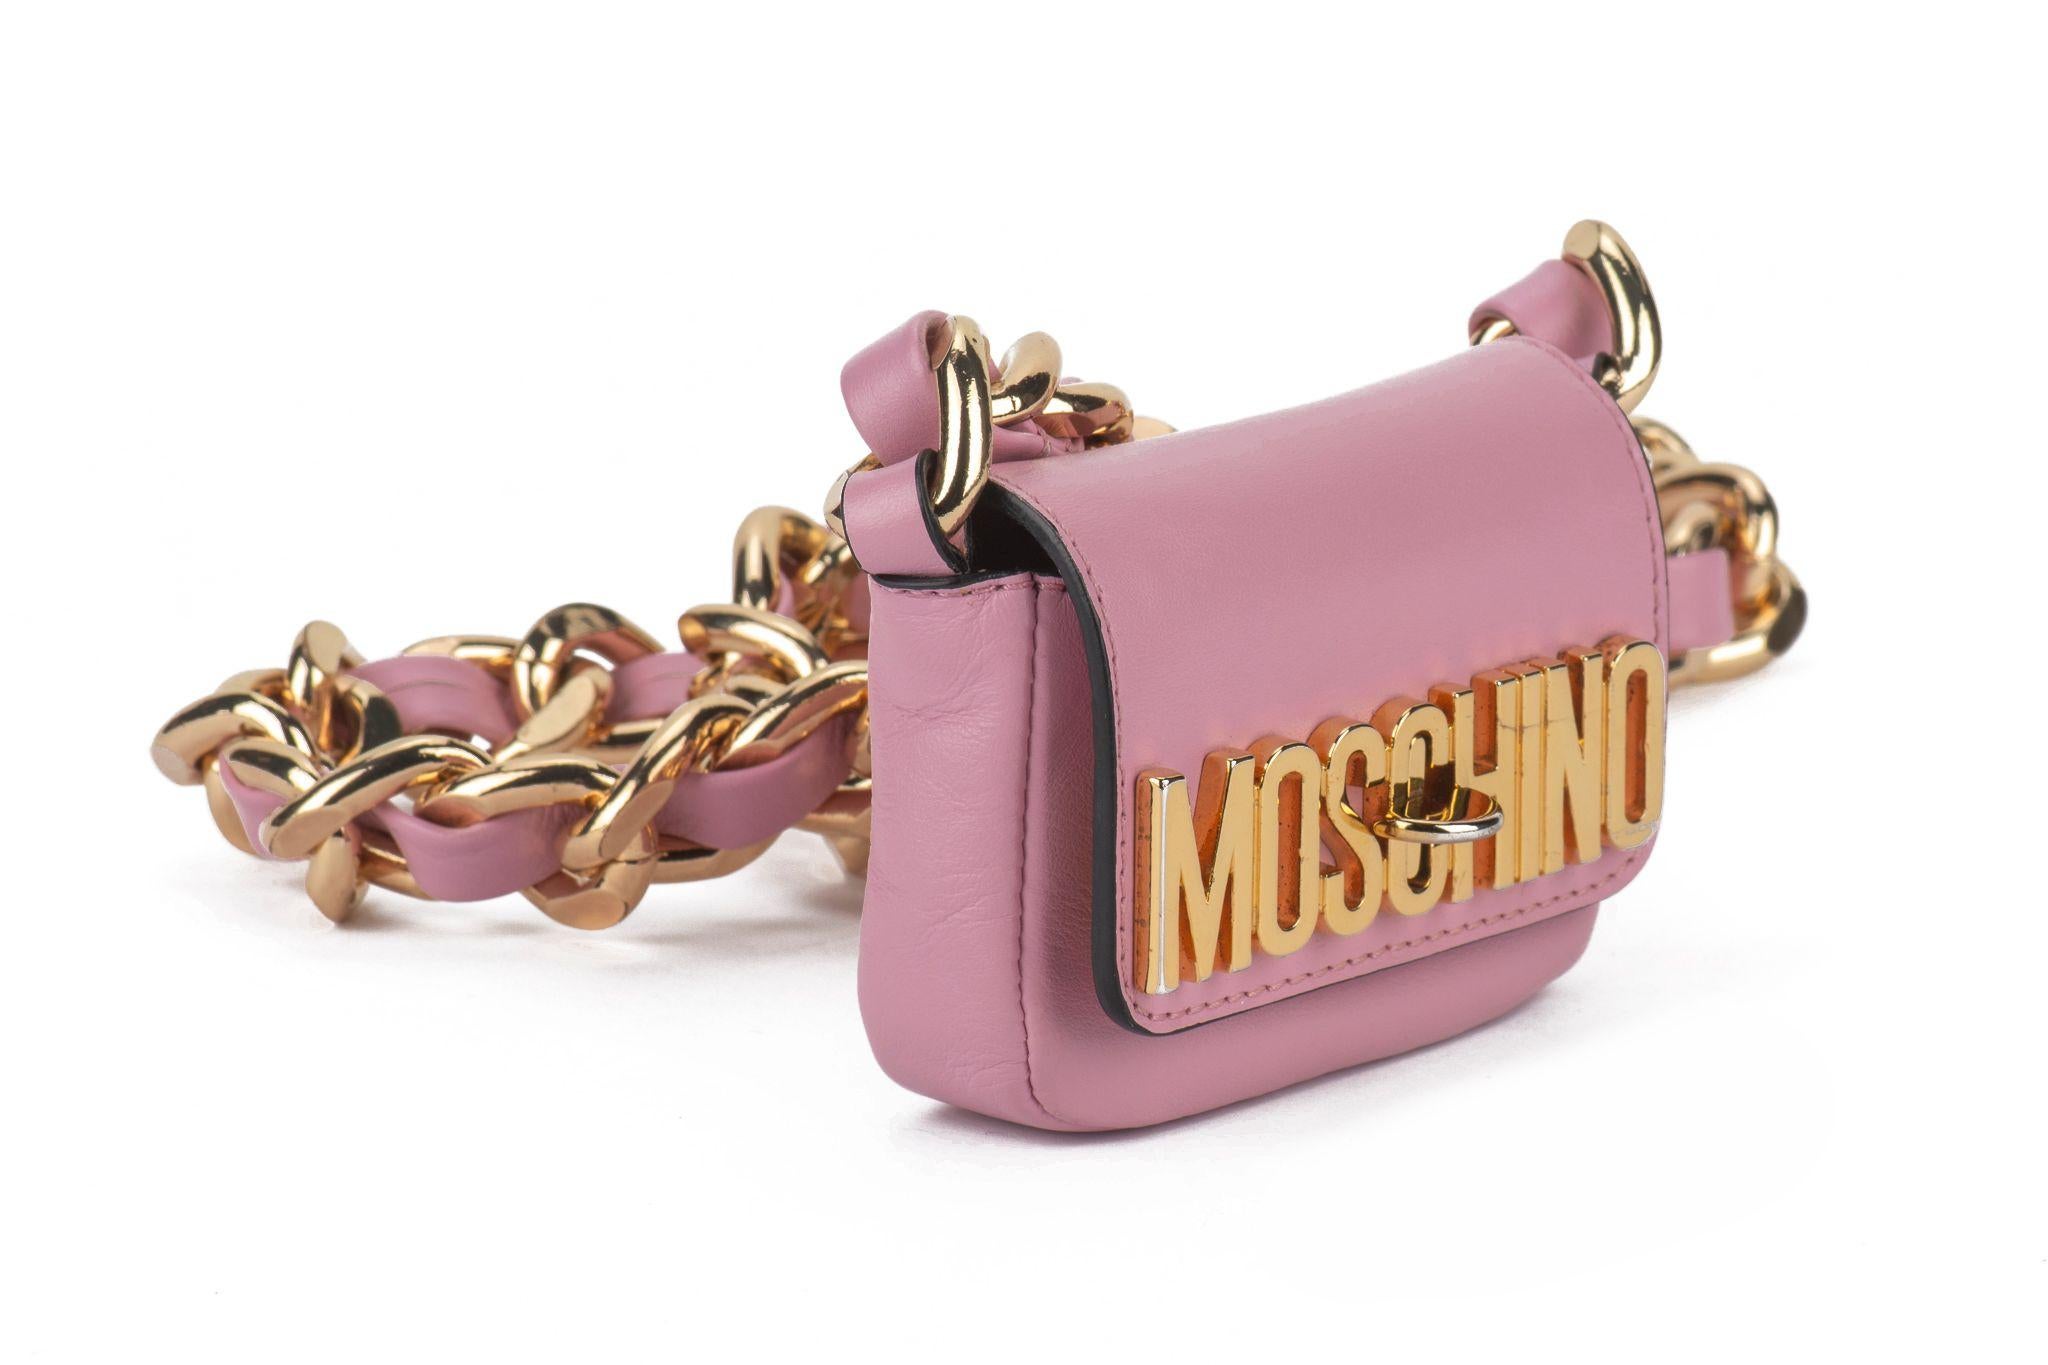 Moschino preloved bubble pink leather mini bag, heavy duty gold chain and front logo. Minor tarnish on turn lock.
Little scratch in a corner as in photo. Shoulder strap drop 20”.